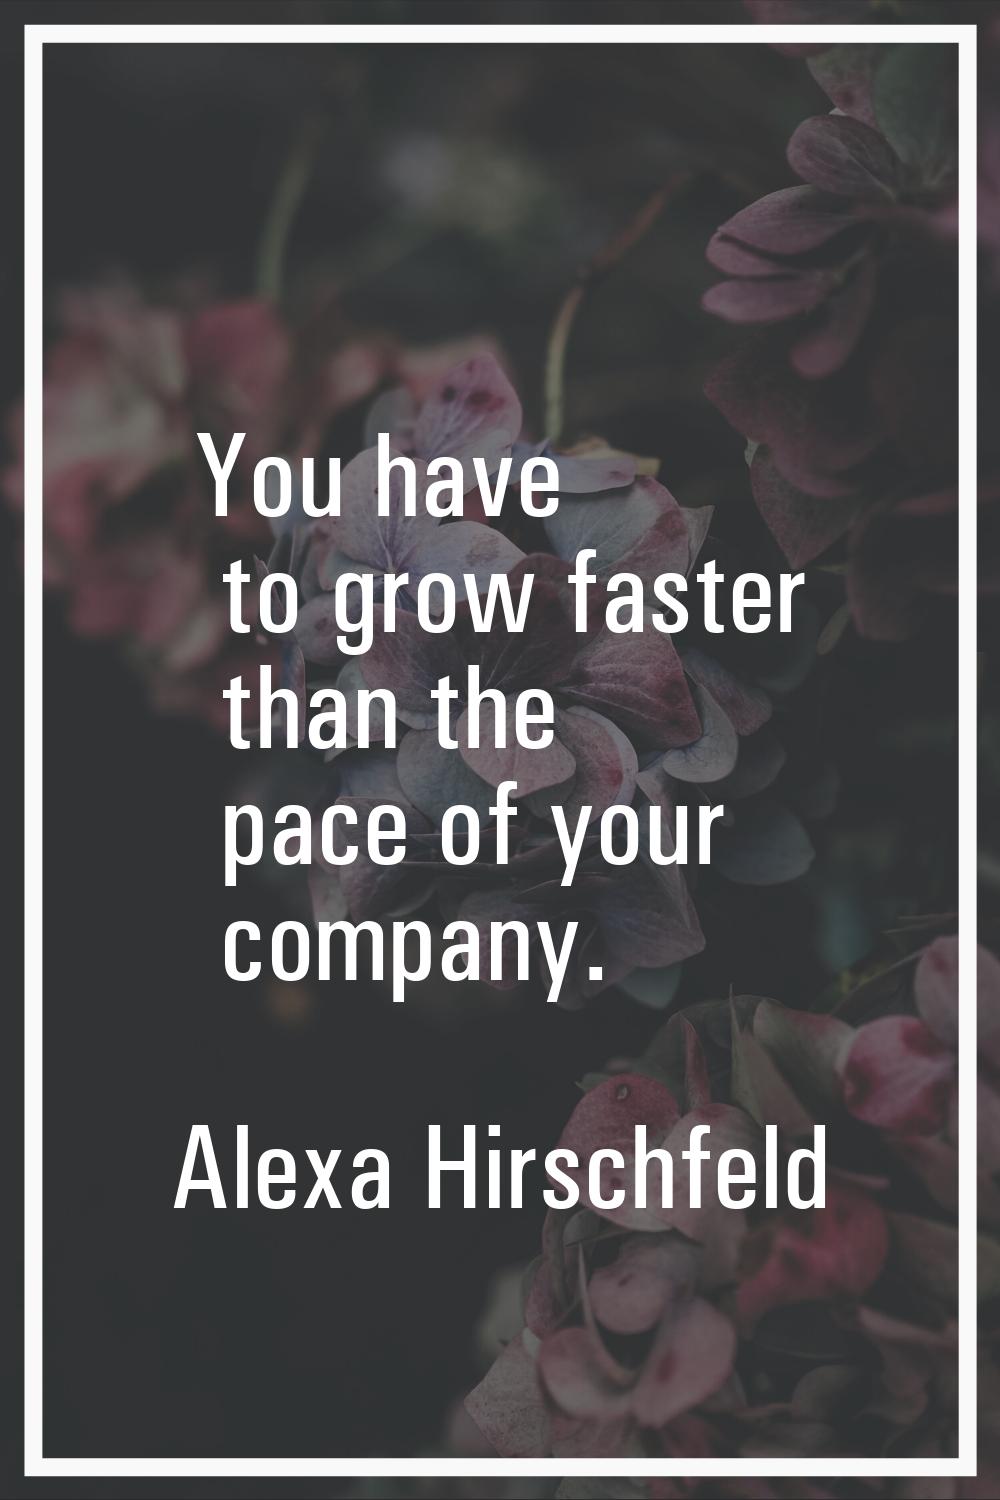 You have to grow faster than the pace of your company.